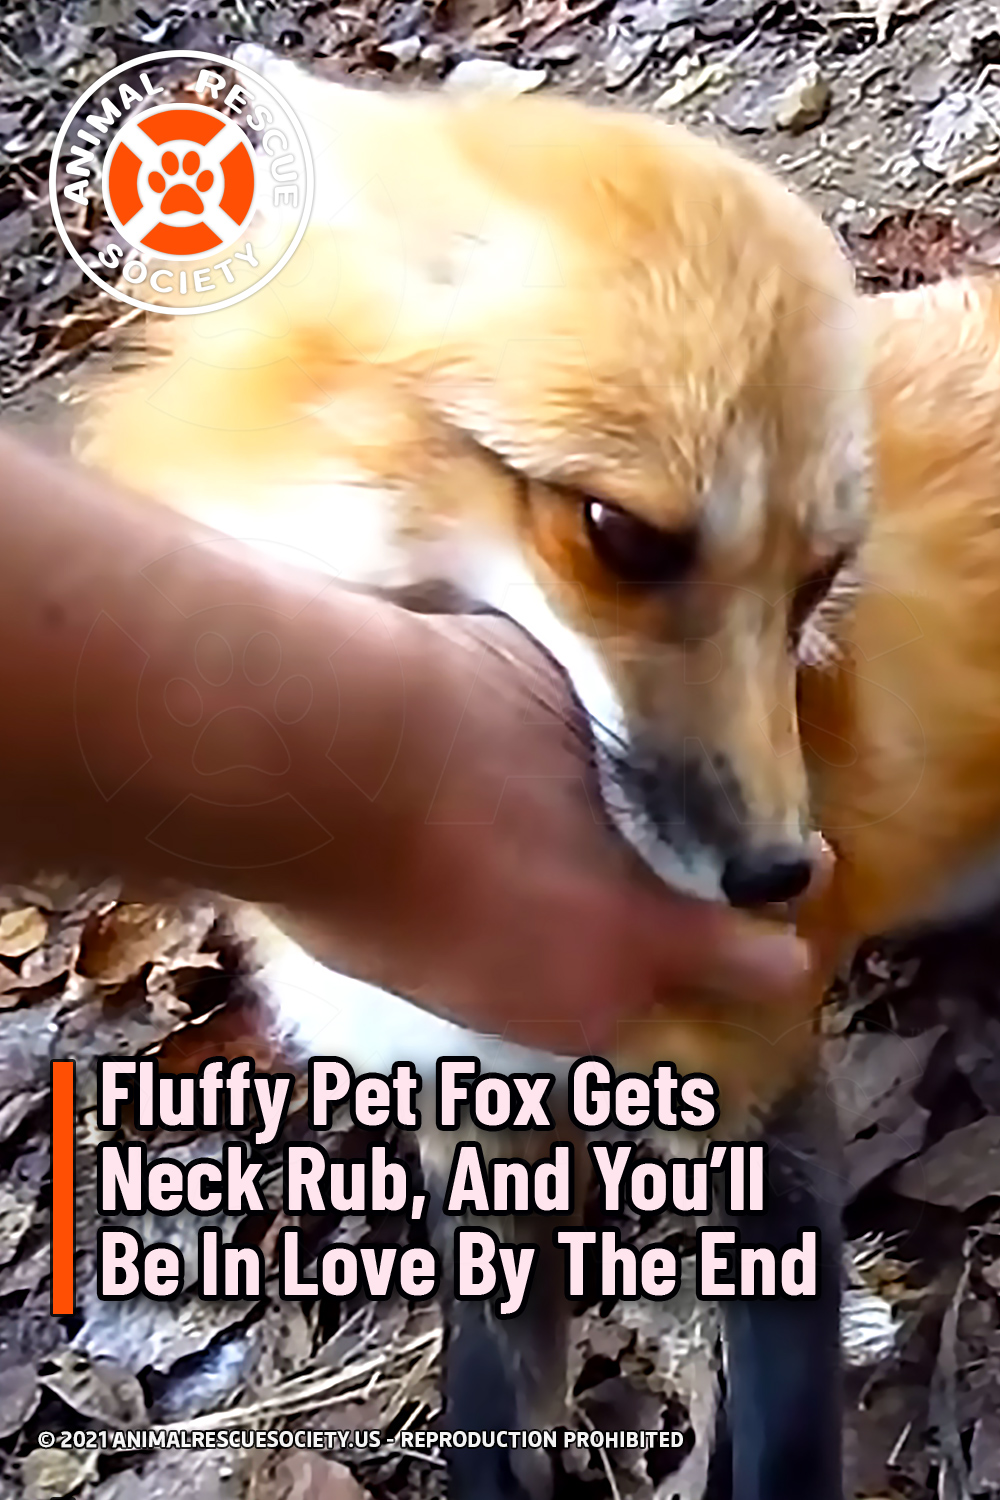 Fluffy Pet Fox Gets Neck Rub, And You’ll Be In Love By The End